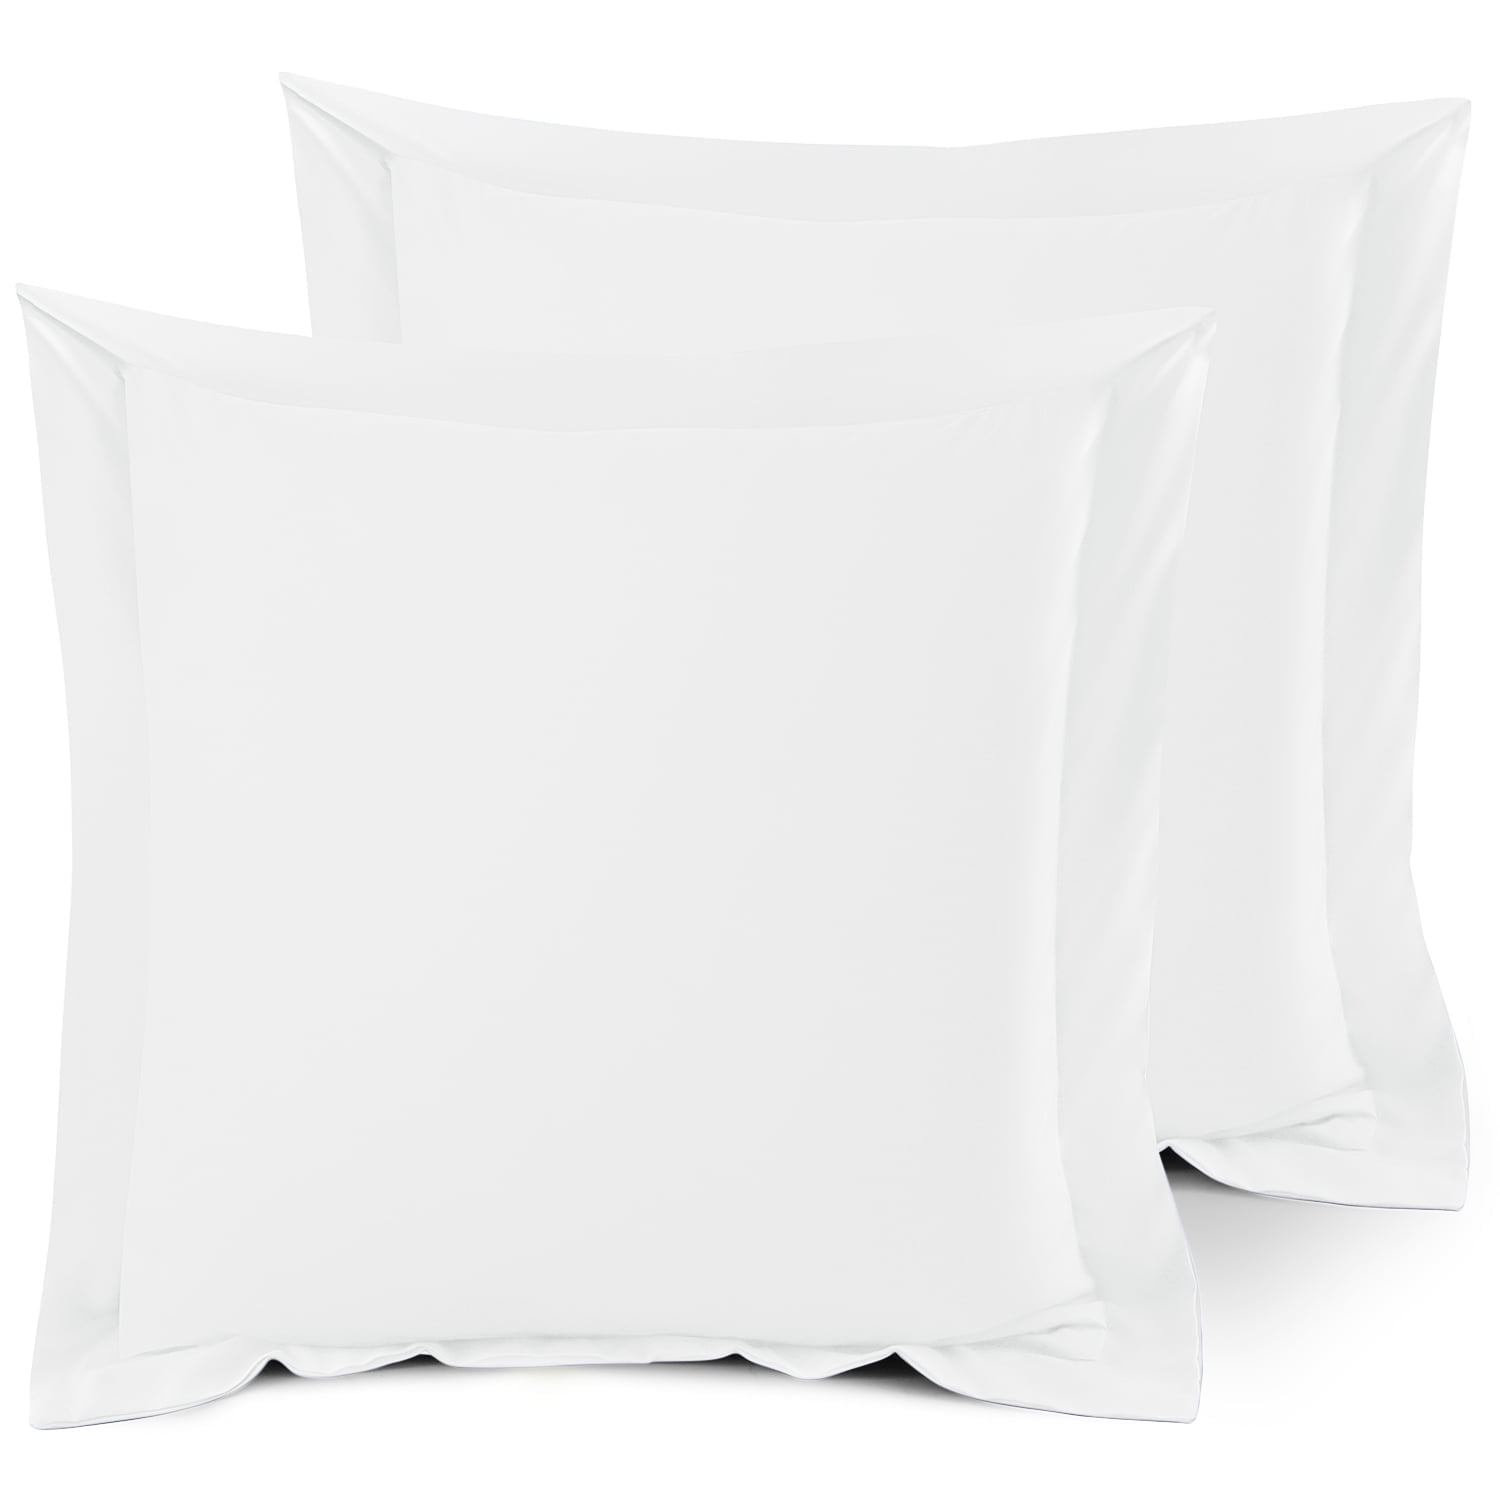 Hemstitched 11x11 Square white Pillow sham. Holds an 8x8 pillow